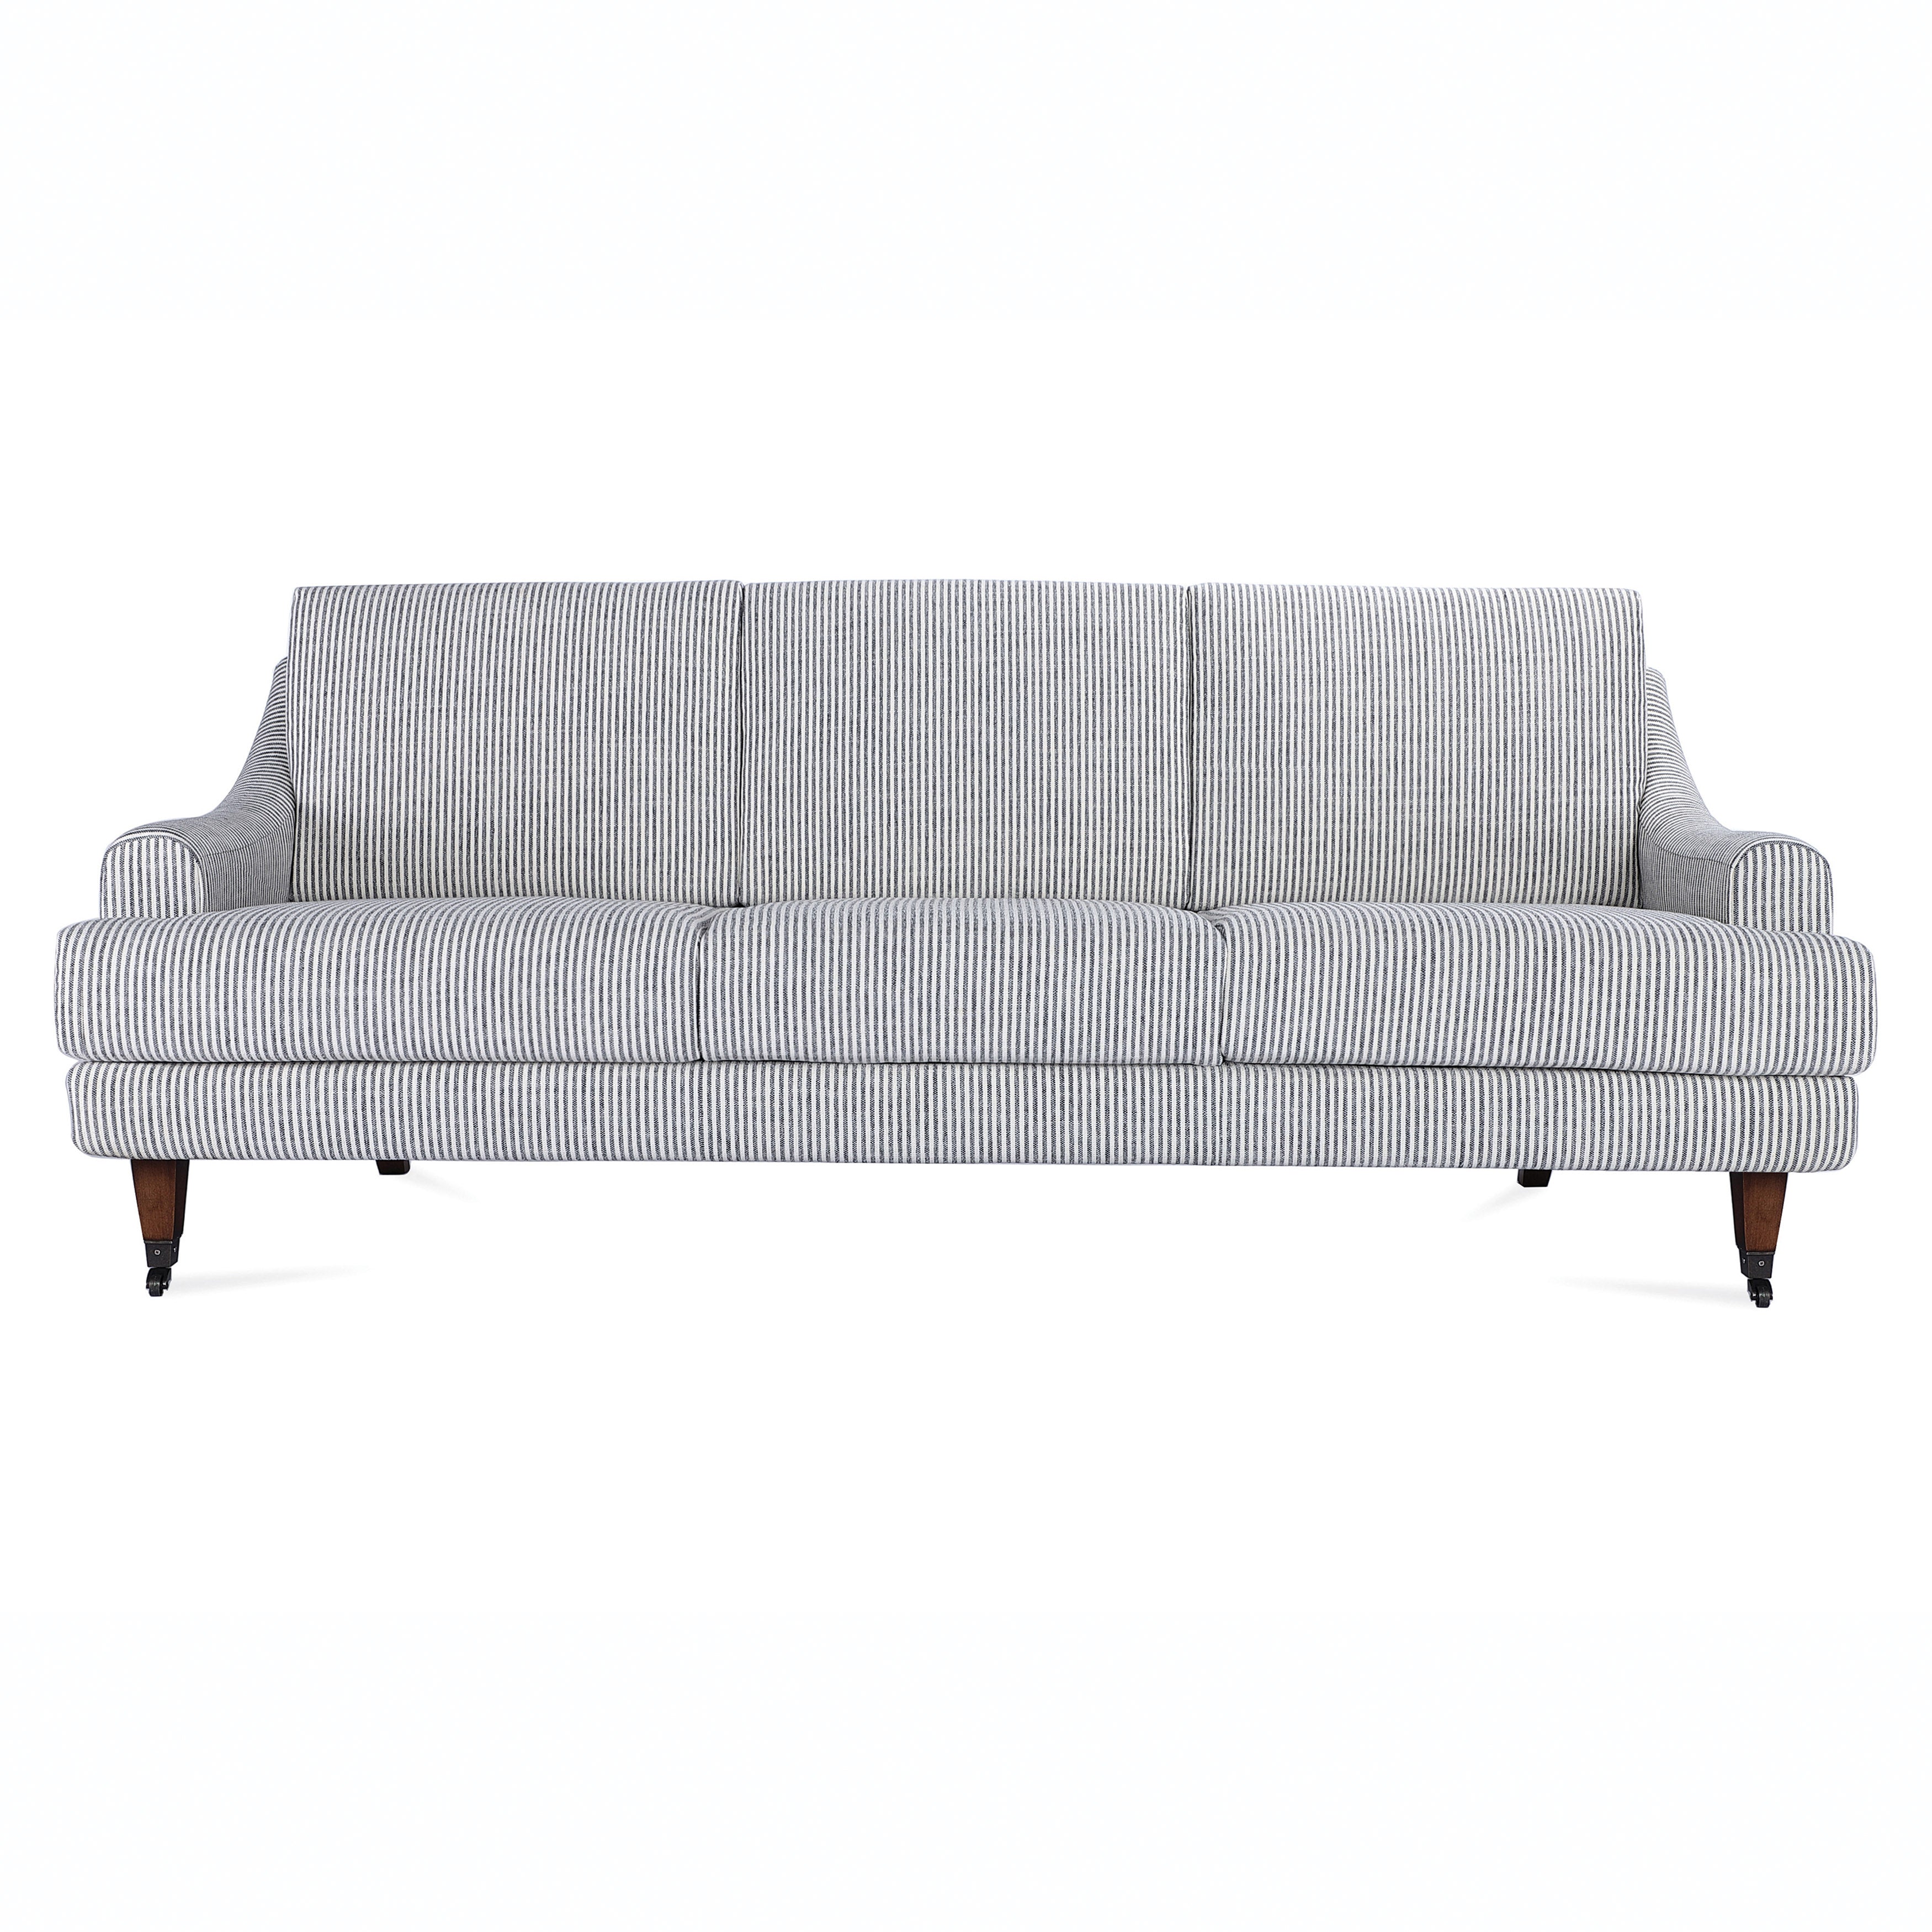 Woven Fabric Upholstered Striped Sofa